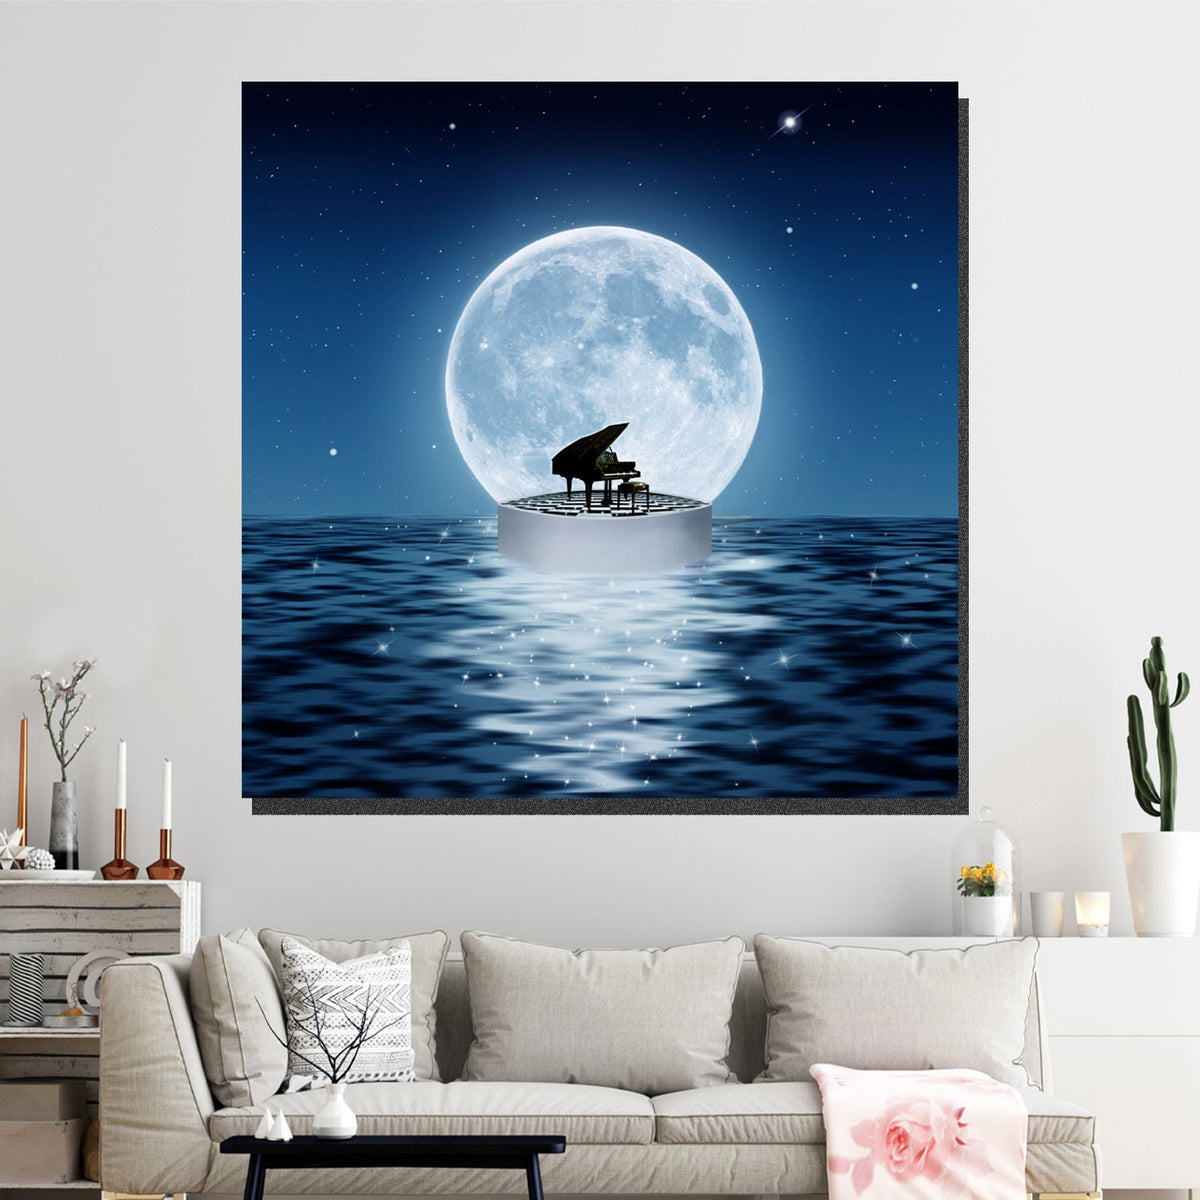 https://cdn.shopify.com/s/files/1/0387/9986/8044/products/PianoAndFullMoonCanvasArtprintStretched-3.jpg